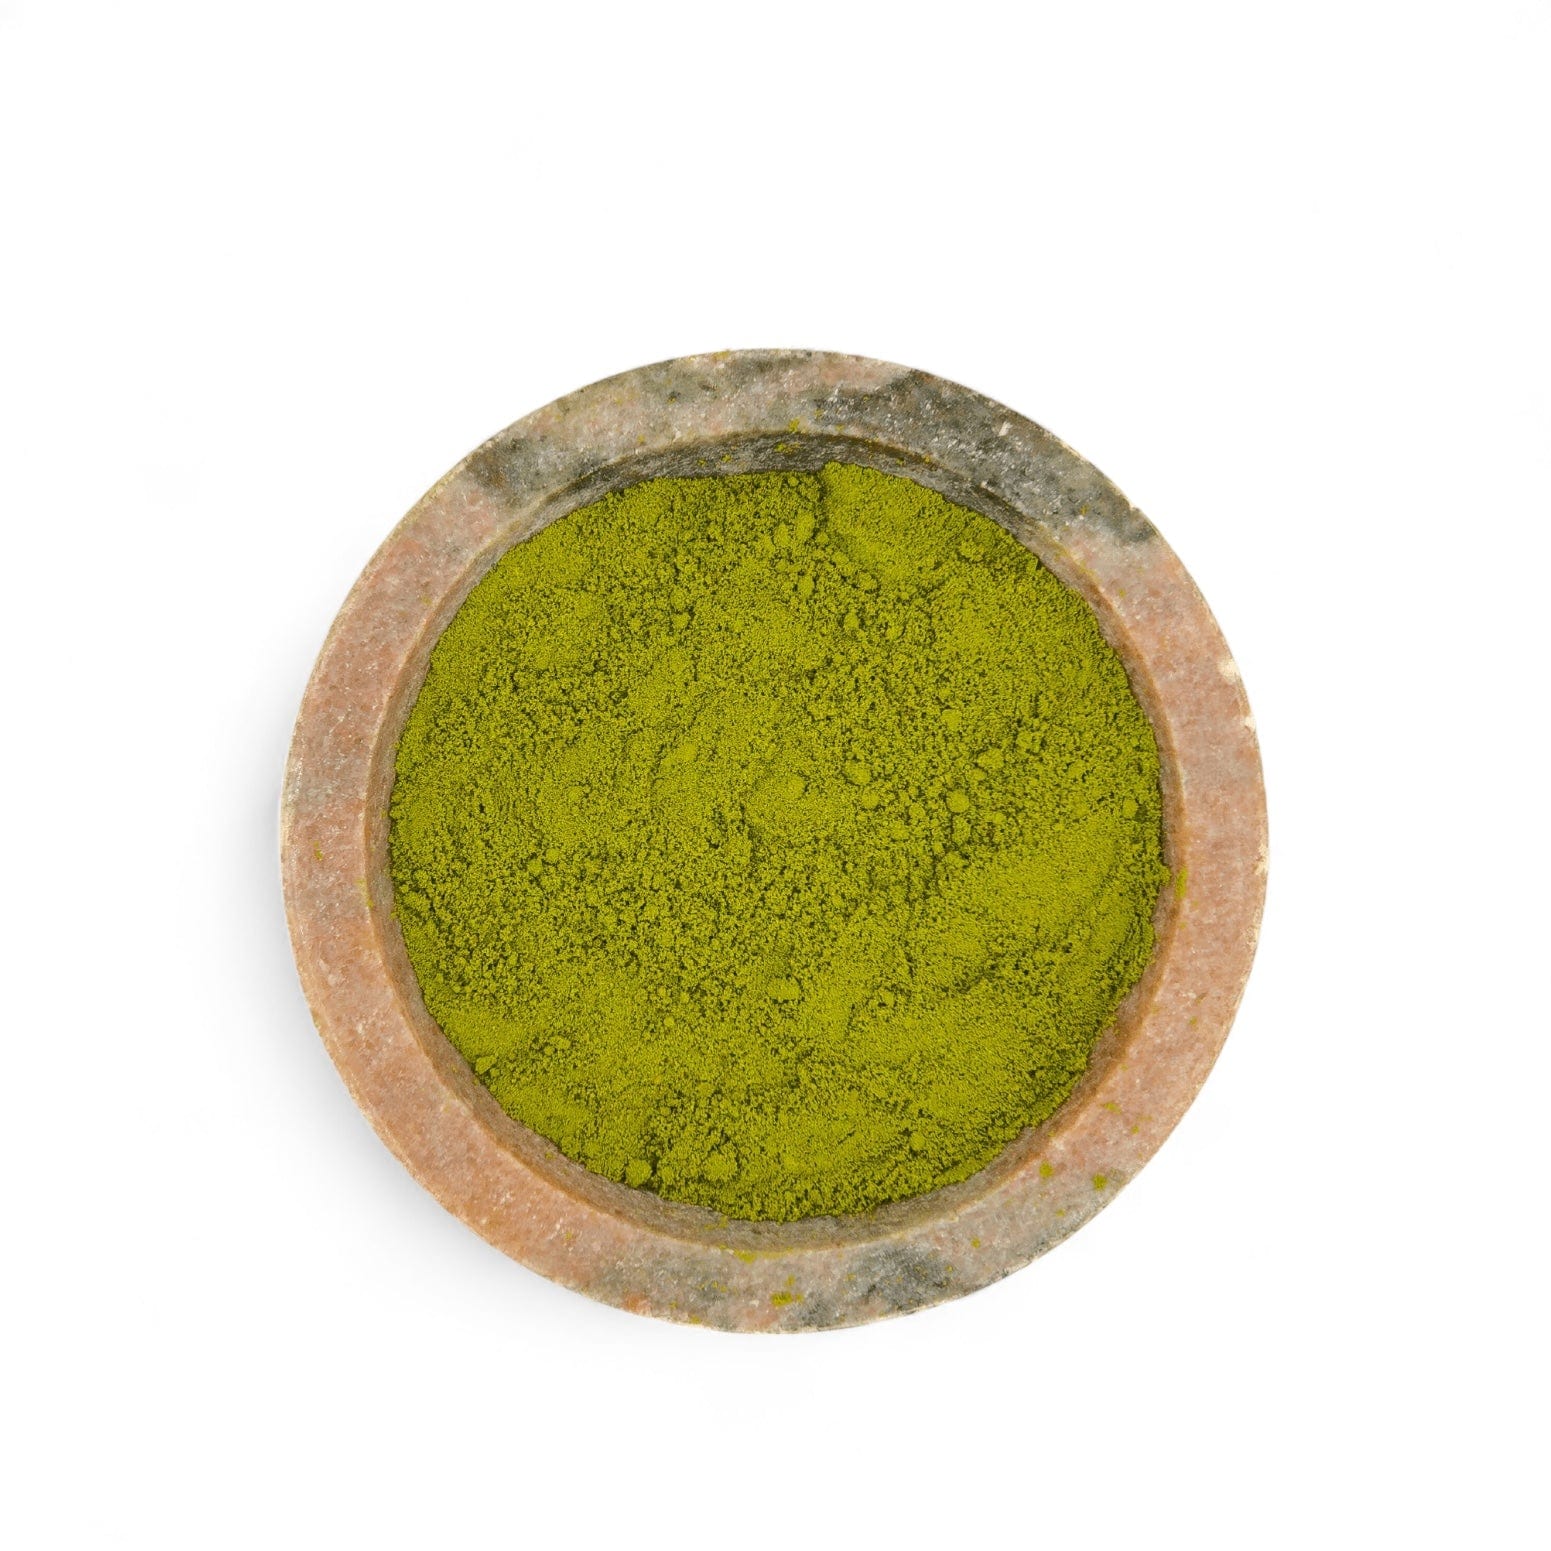 Matcha Latte Powder in Boutique Cylinder by The Tea Collective